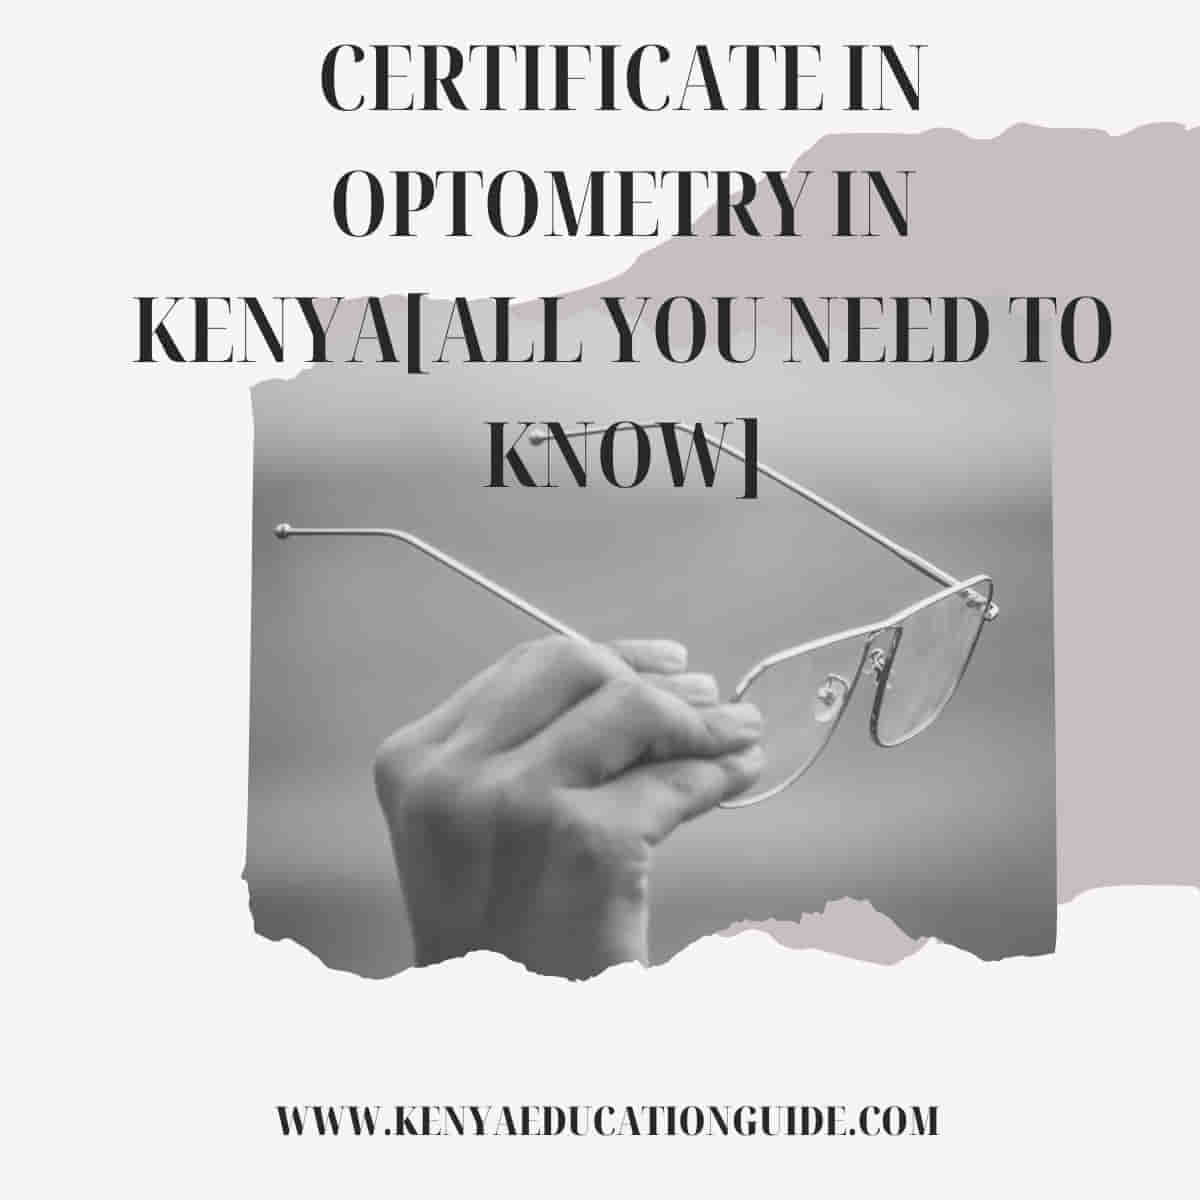 Certificate in optometry in Kenya [All you need to know]